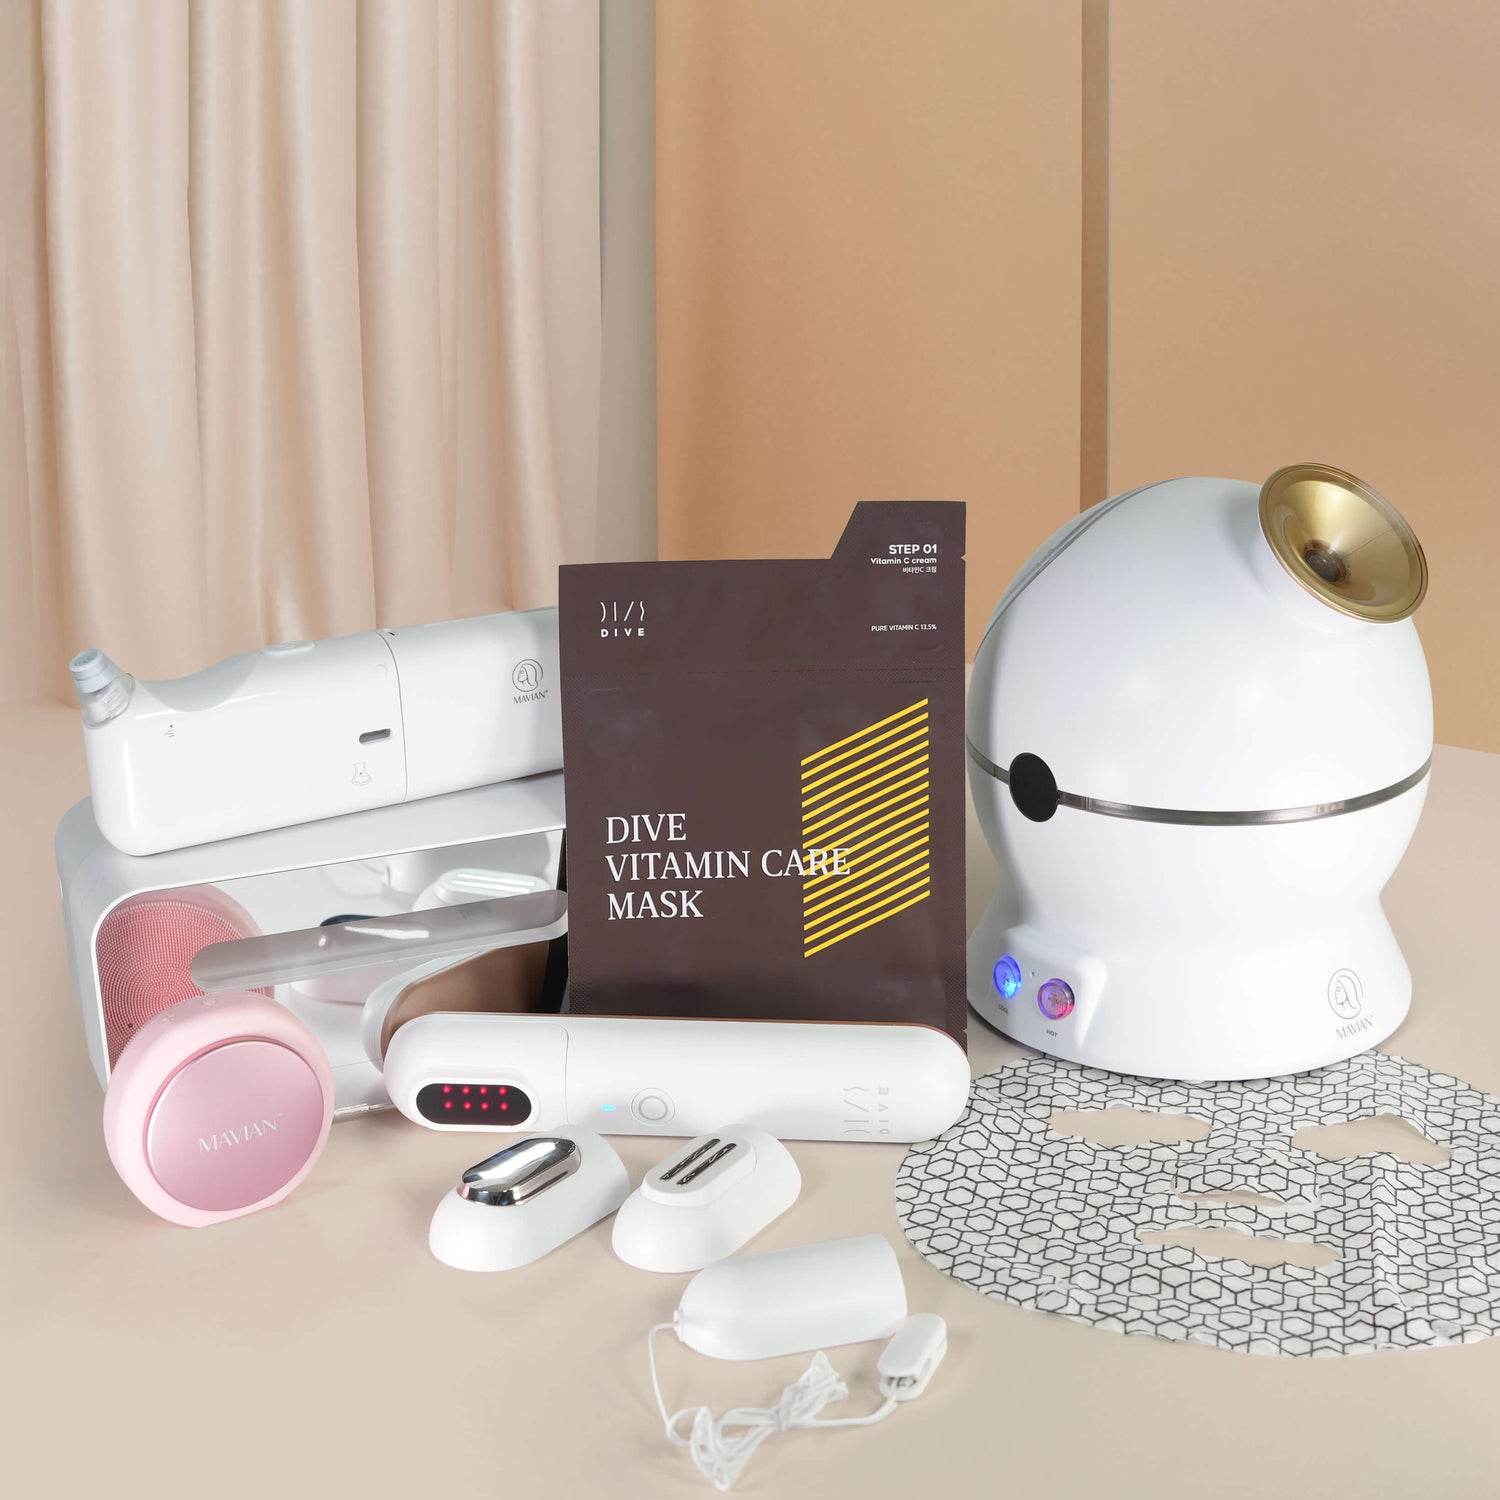 Mavian Beauty Devices and Products